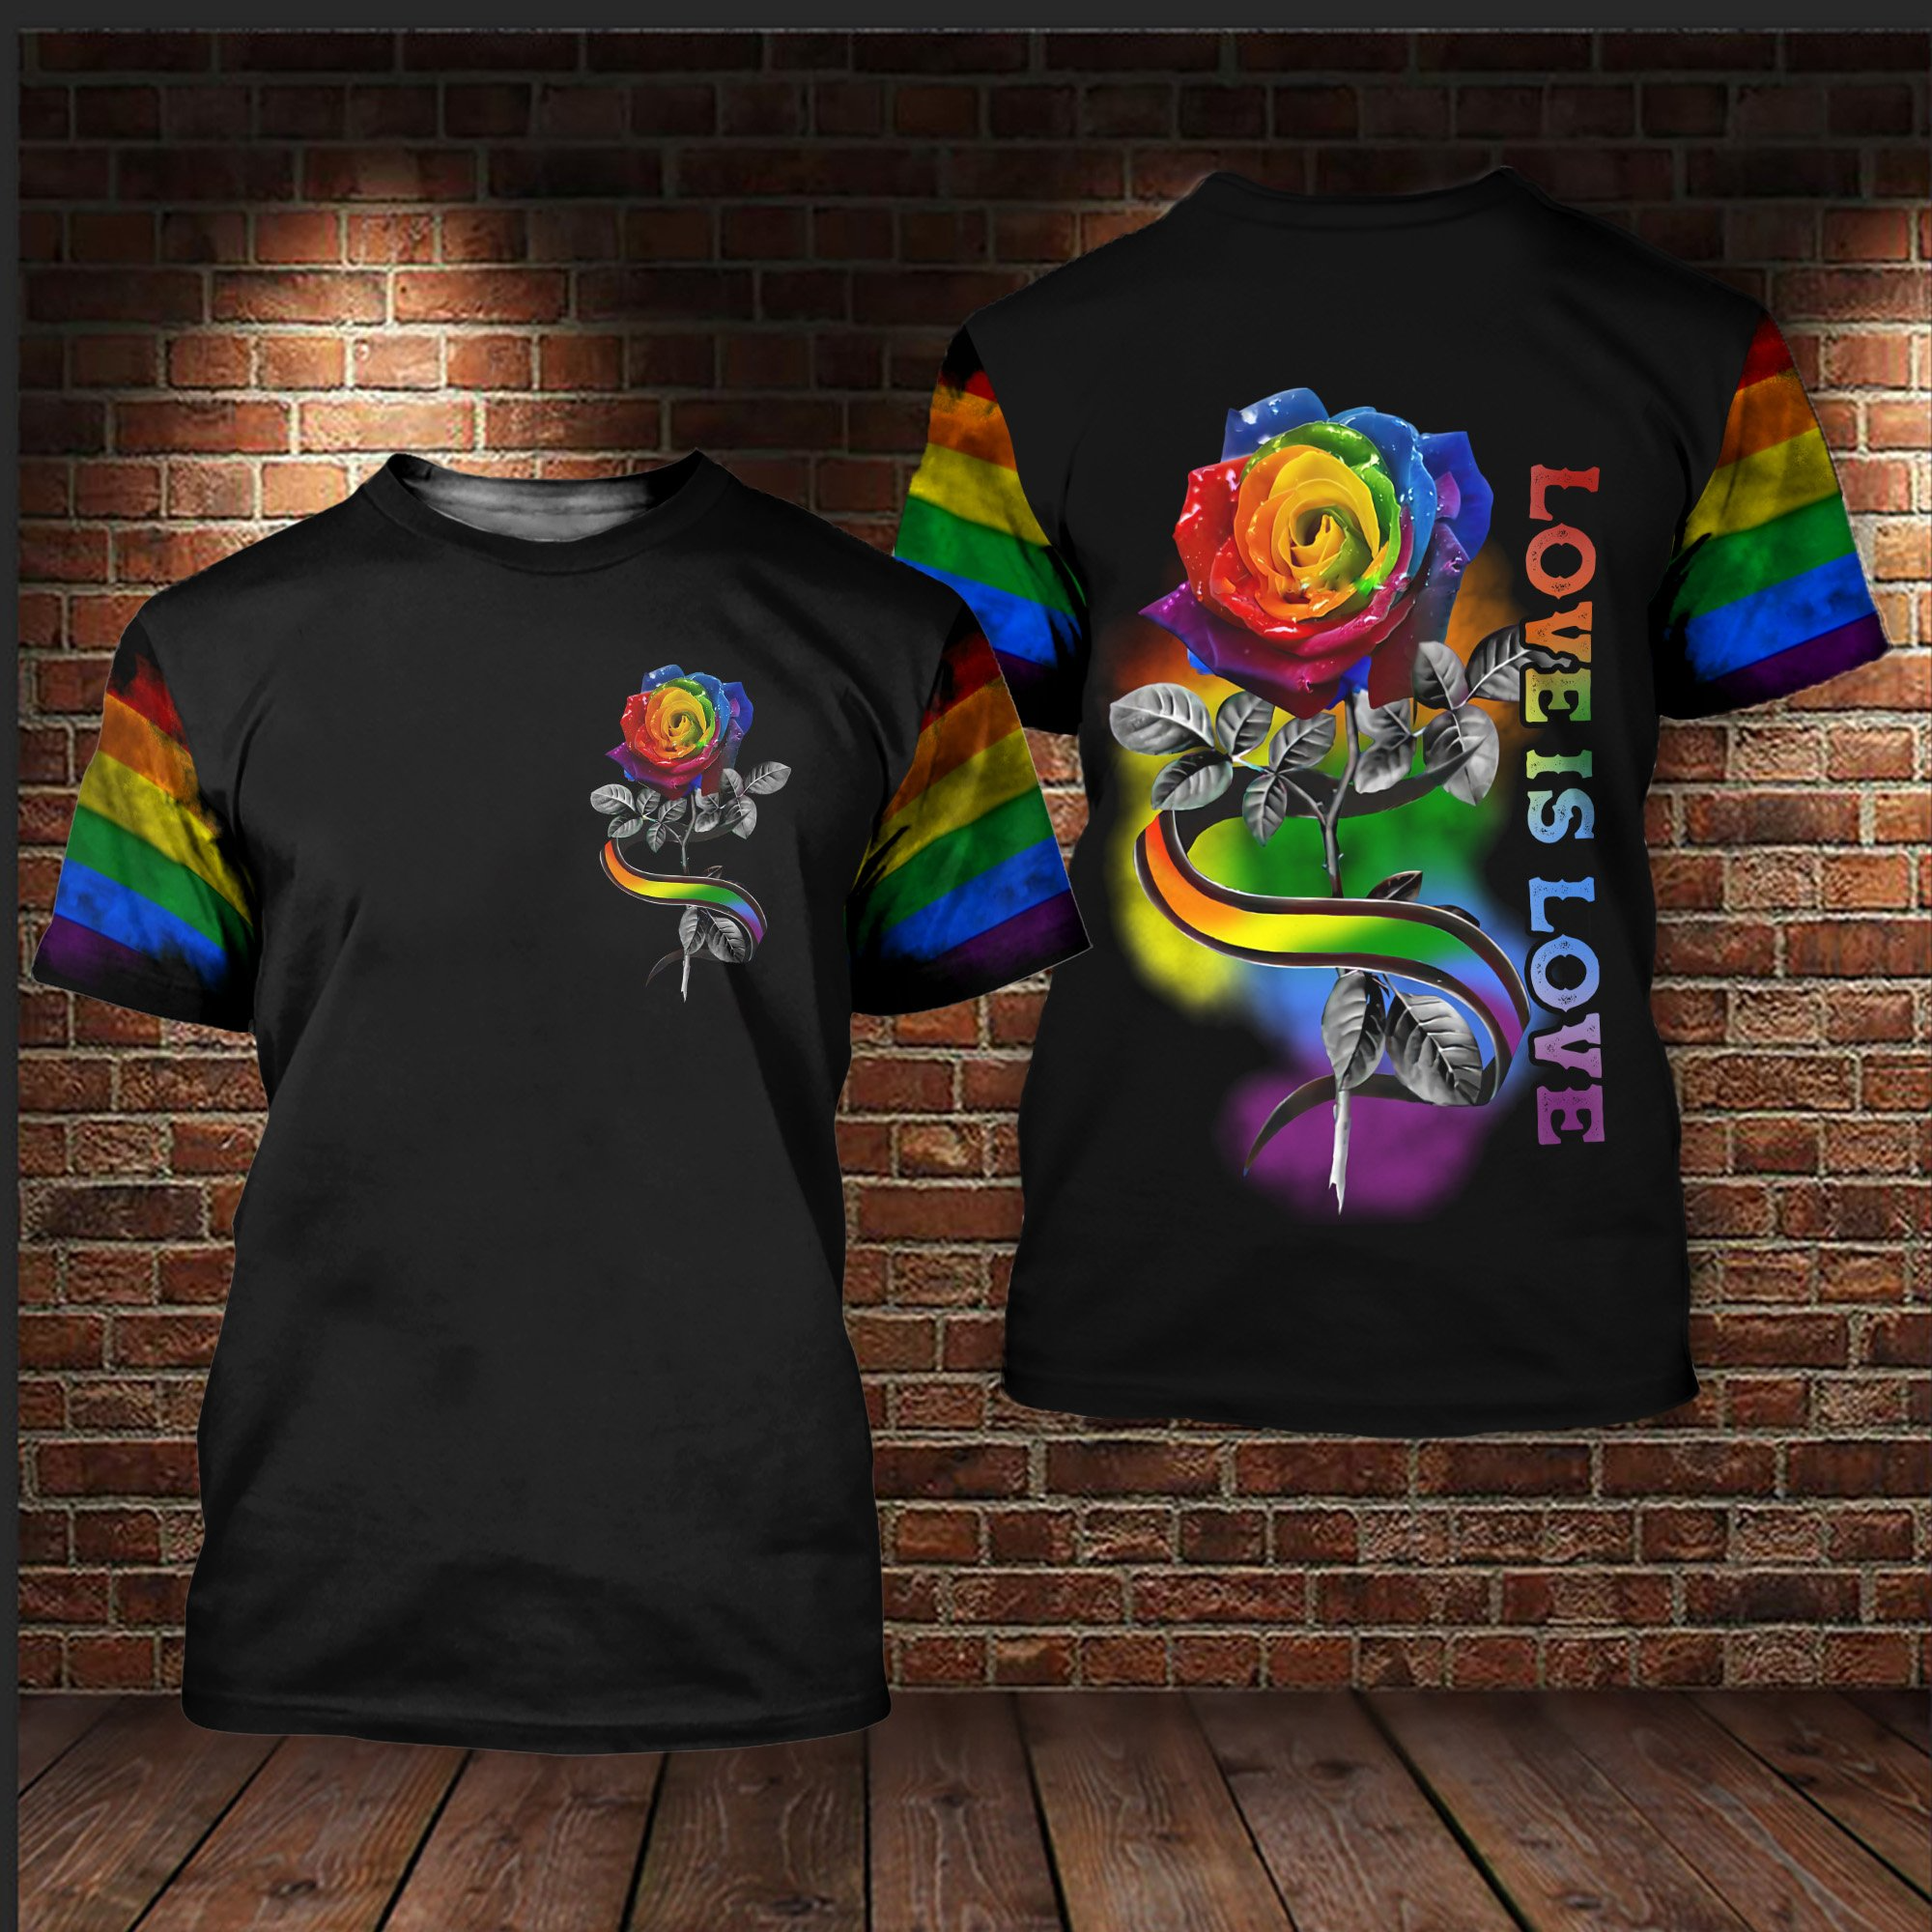 LGBT Rose Love Is Love 3D All Over Printed Shirts For LGBT Community/ Gift For LGBT Pride Month